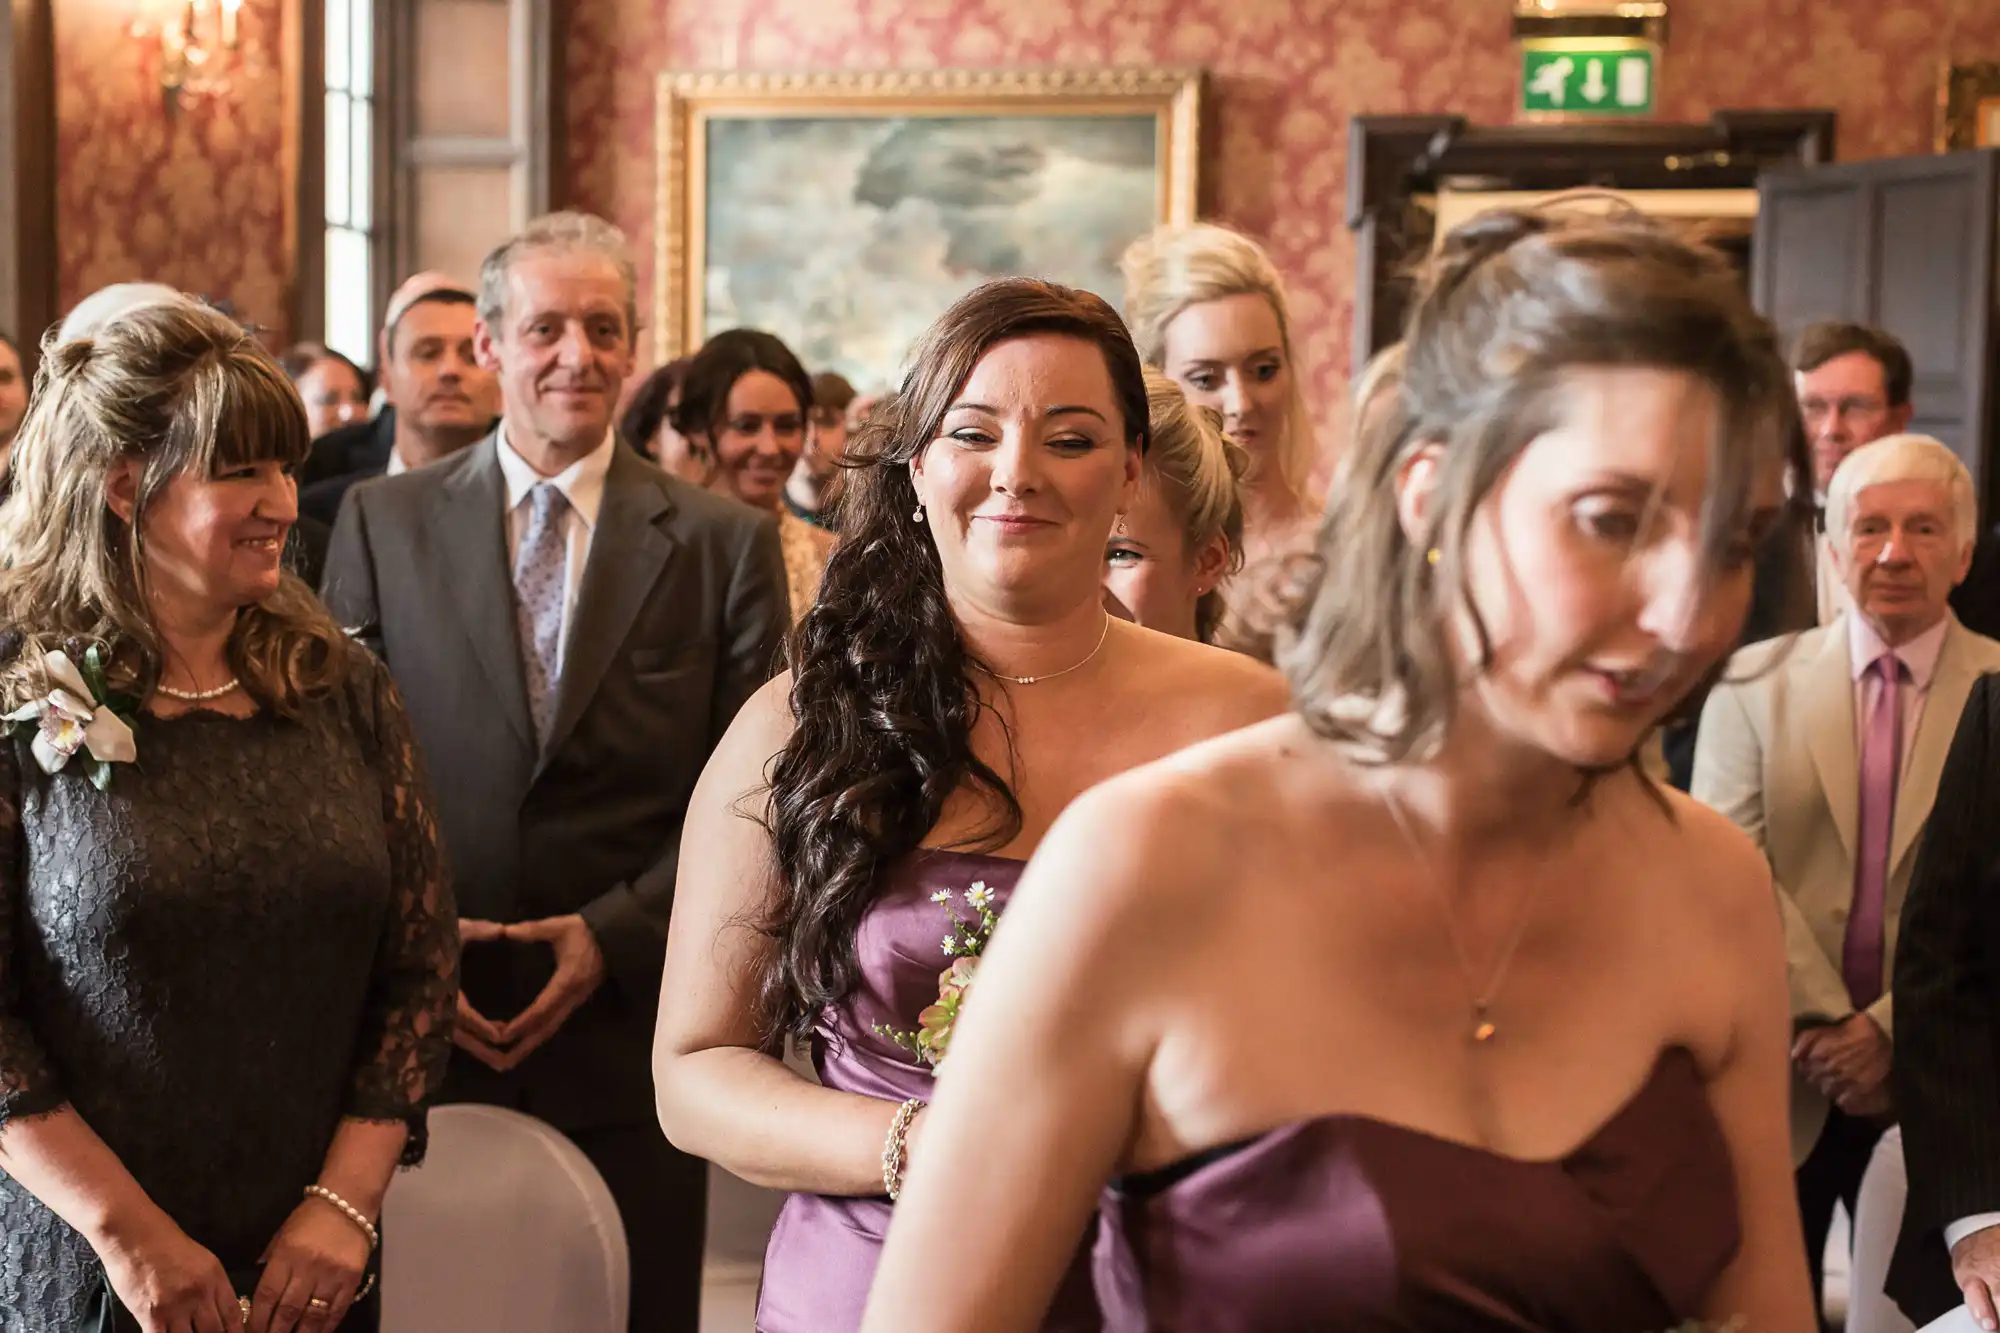 A wedding scene with guests looking on, focusing on a woman in a purple dress smiling emotionally.